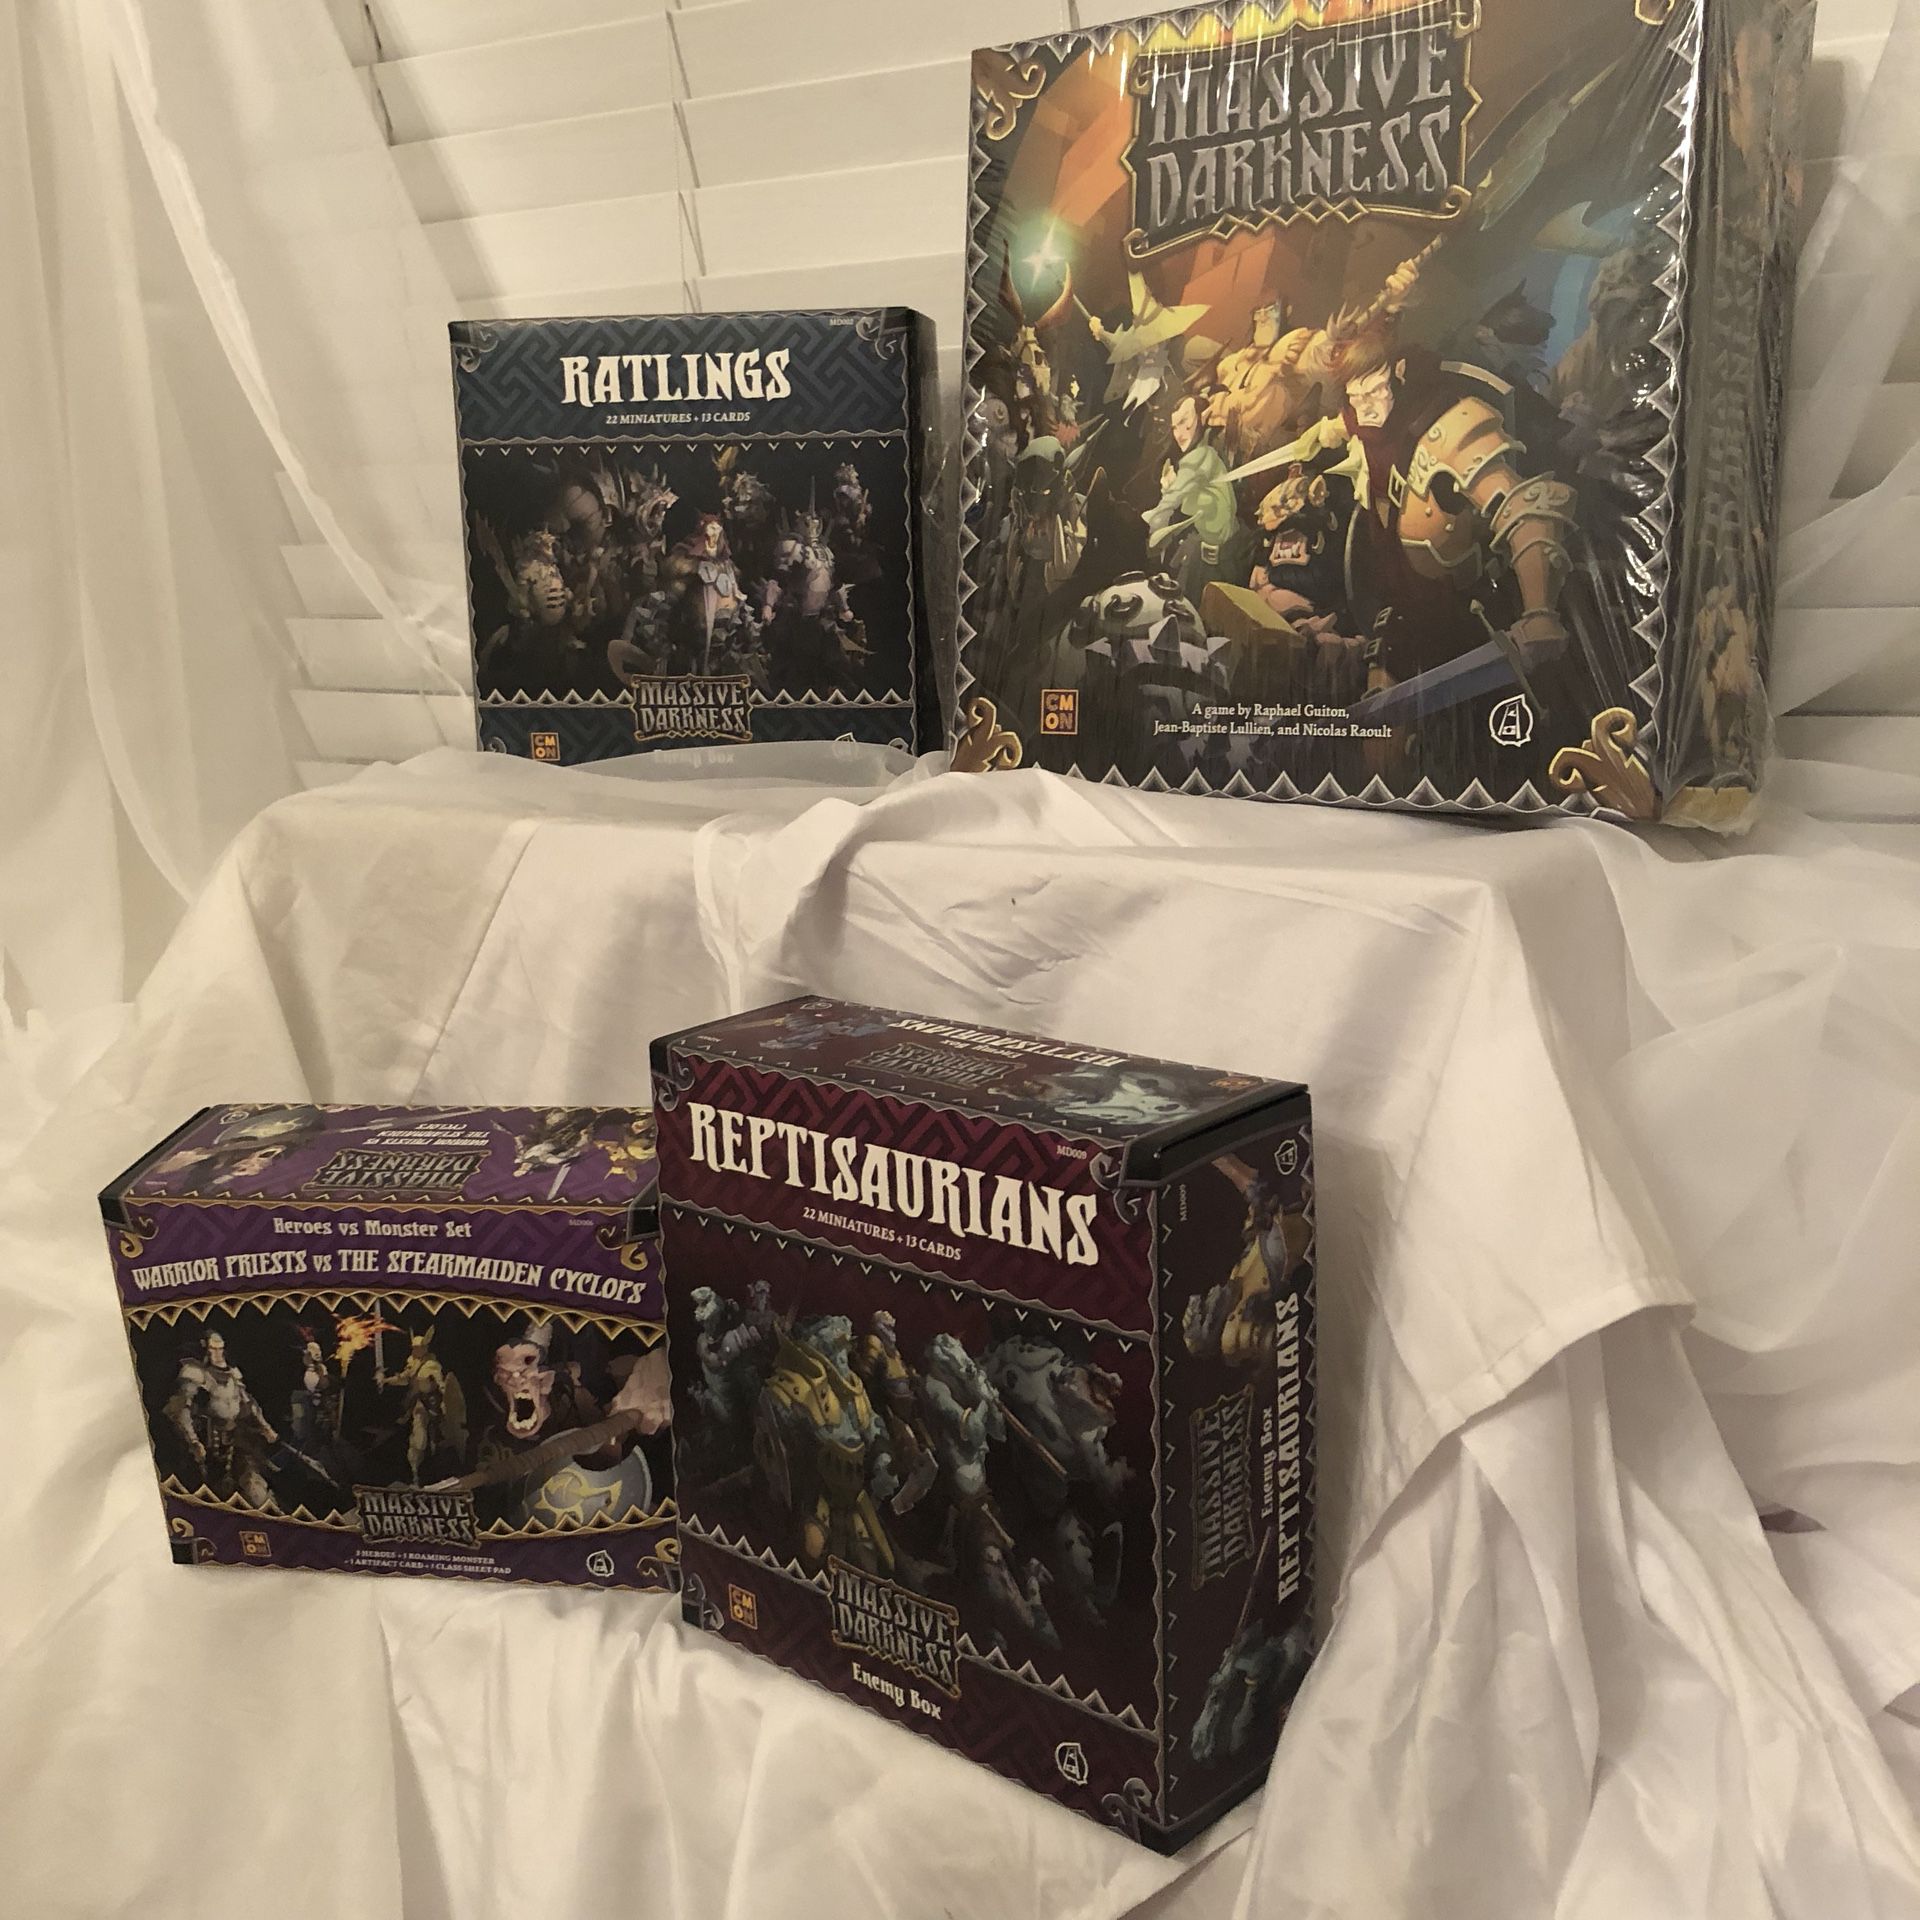 Massive Darkness board game with expansions